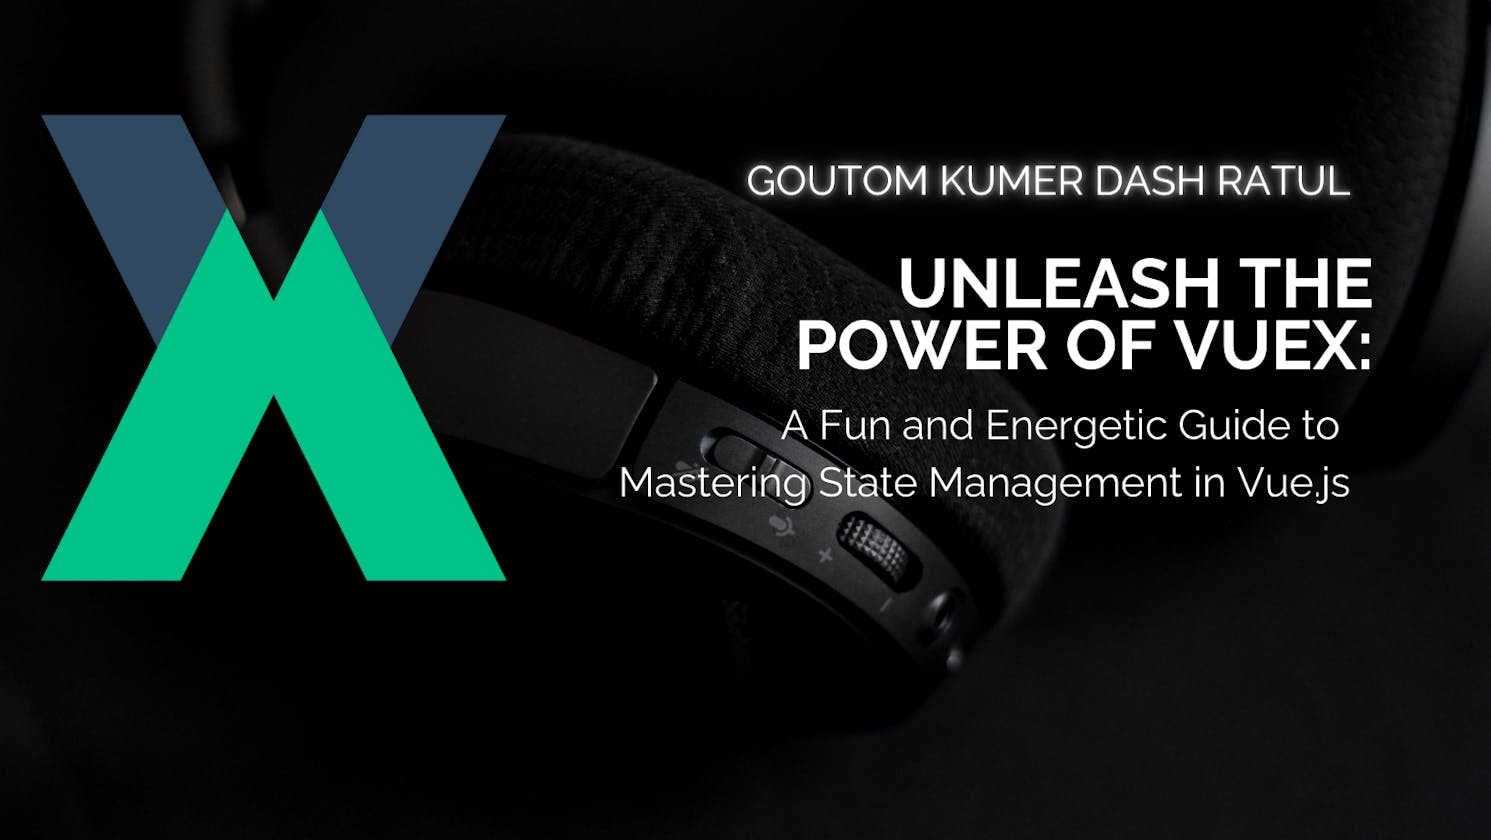 Unleash the Power of Vuex: A Fun and Energetic Guide to Mastering State Management in Vue.js